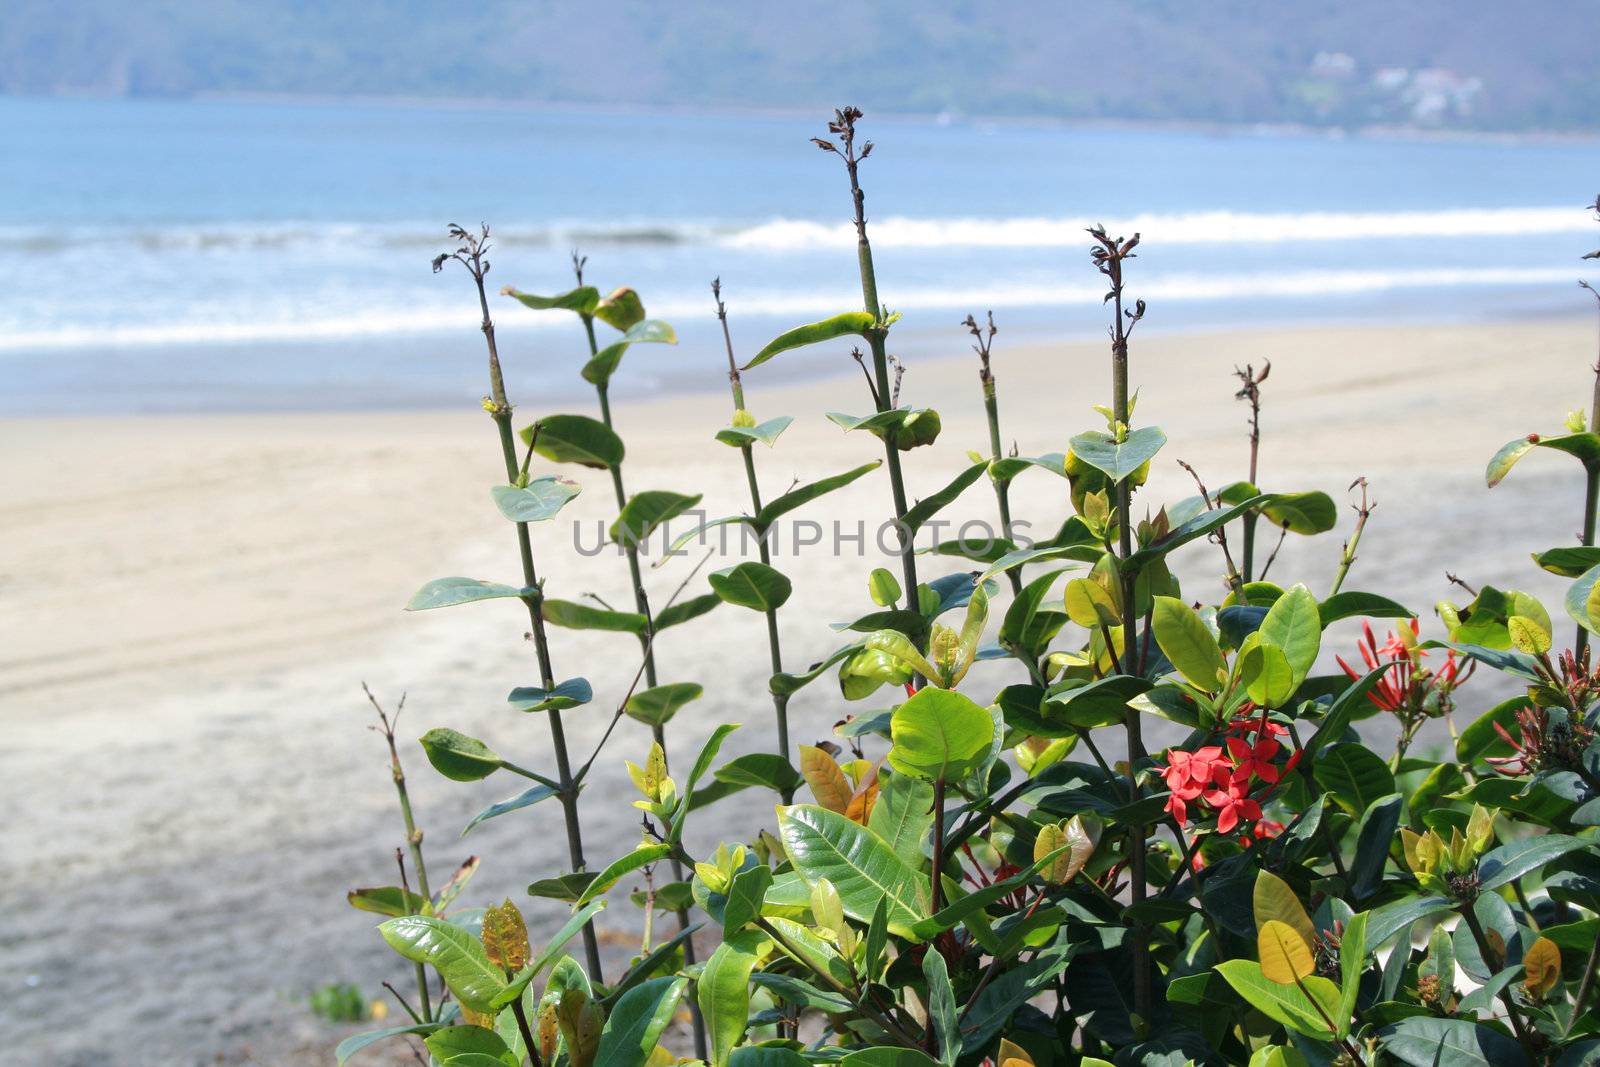 Flowers in front of beach with waves